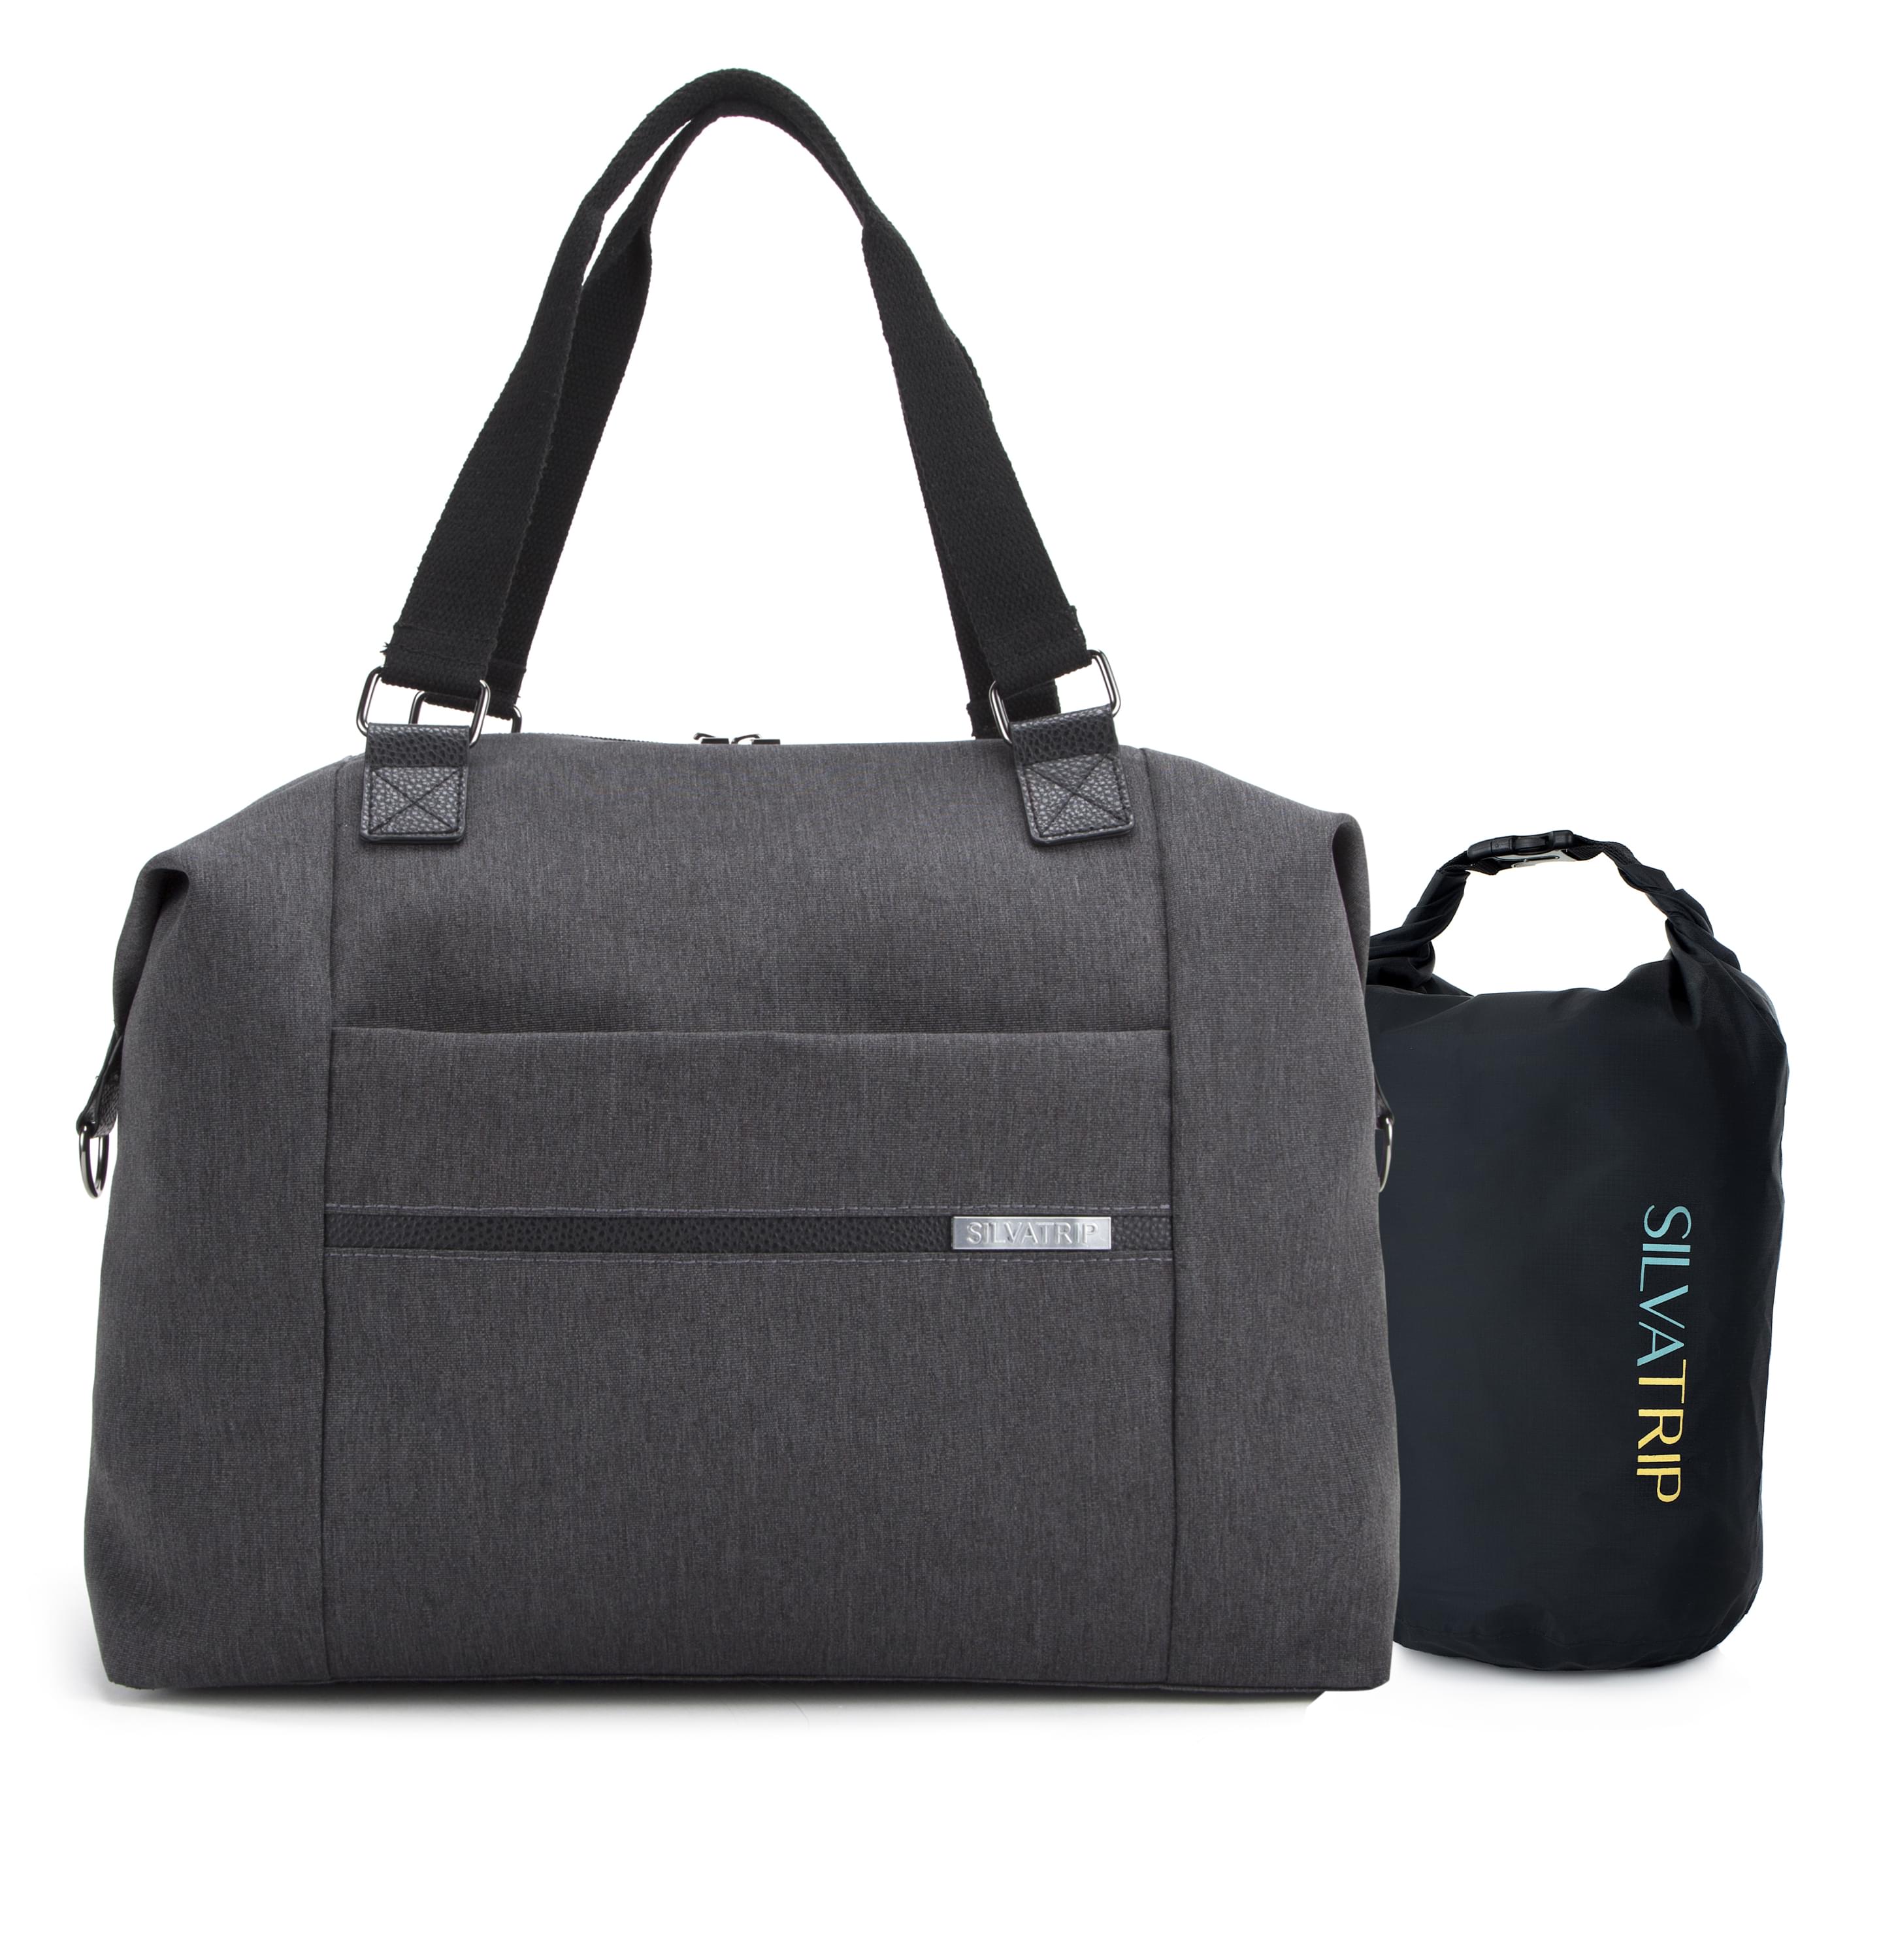 silvatrip Travel Tote Bag with Luggage Sleeve - Underseat Carry on Luggage  - Qualifies as a Personal Item Flight Bag by Airlines